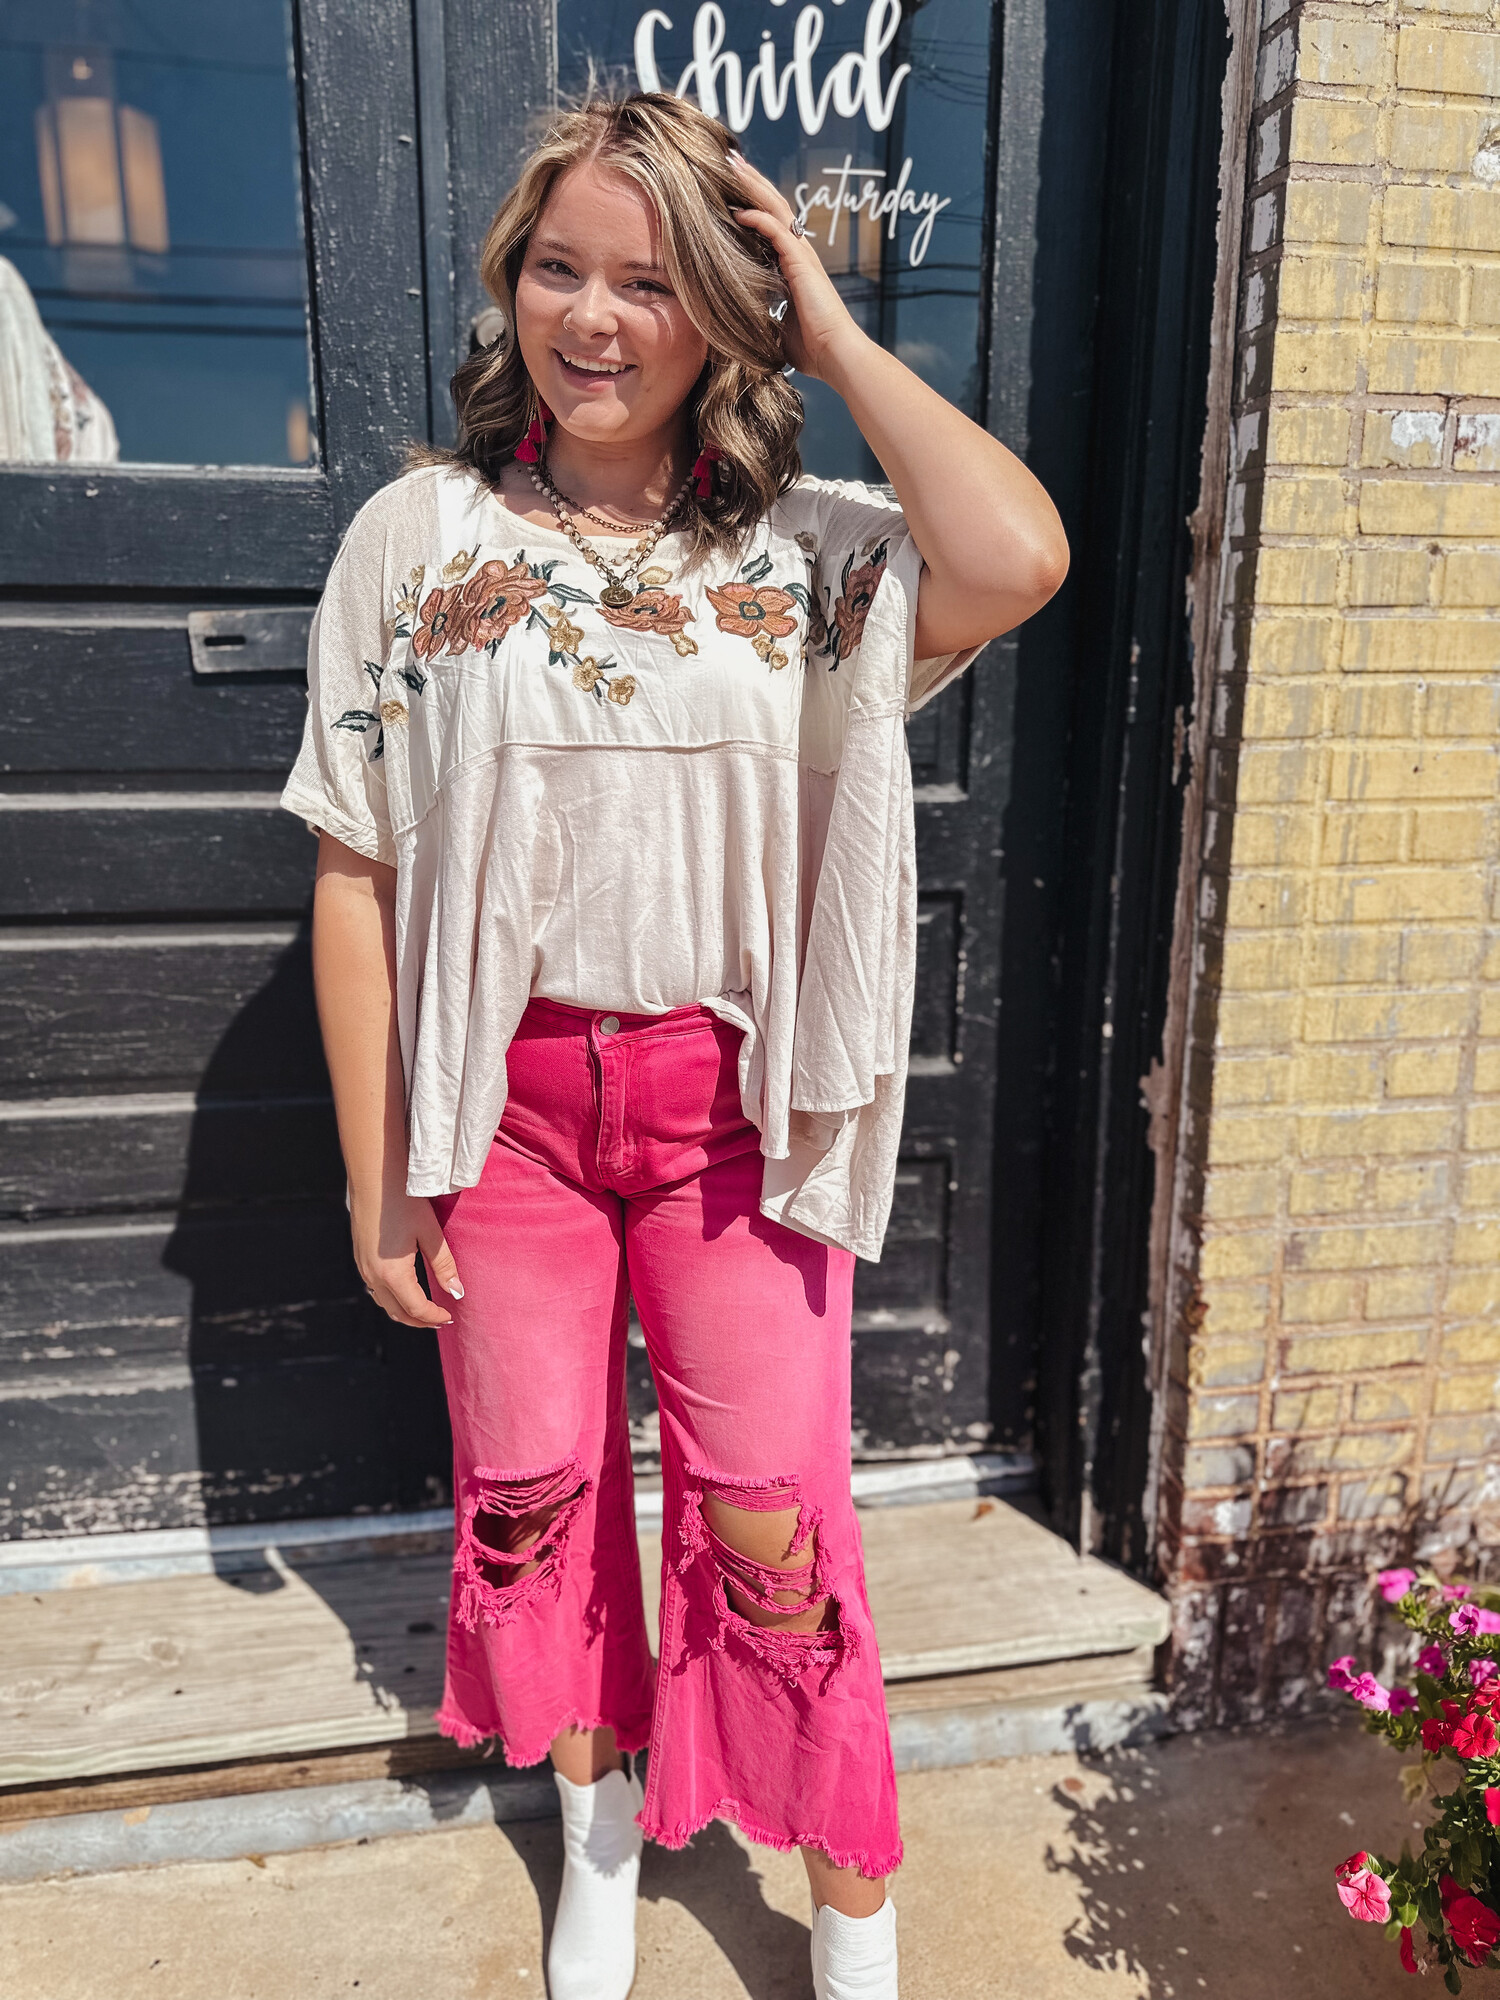 These Hot Pink distressed jeans are the perfect staple piece for football/fall season! Dress them up or down, you're sure to be the cutest around town!
Available in sizes Small-XLarge.